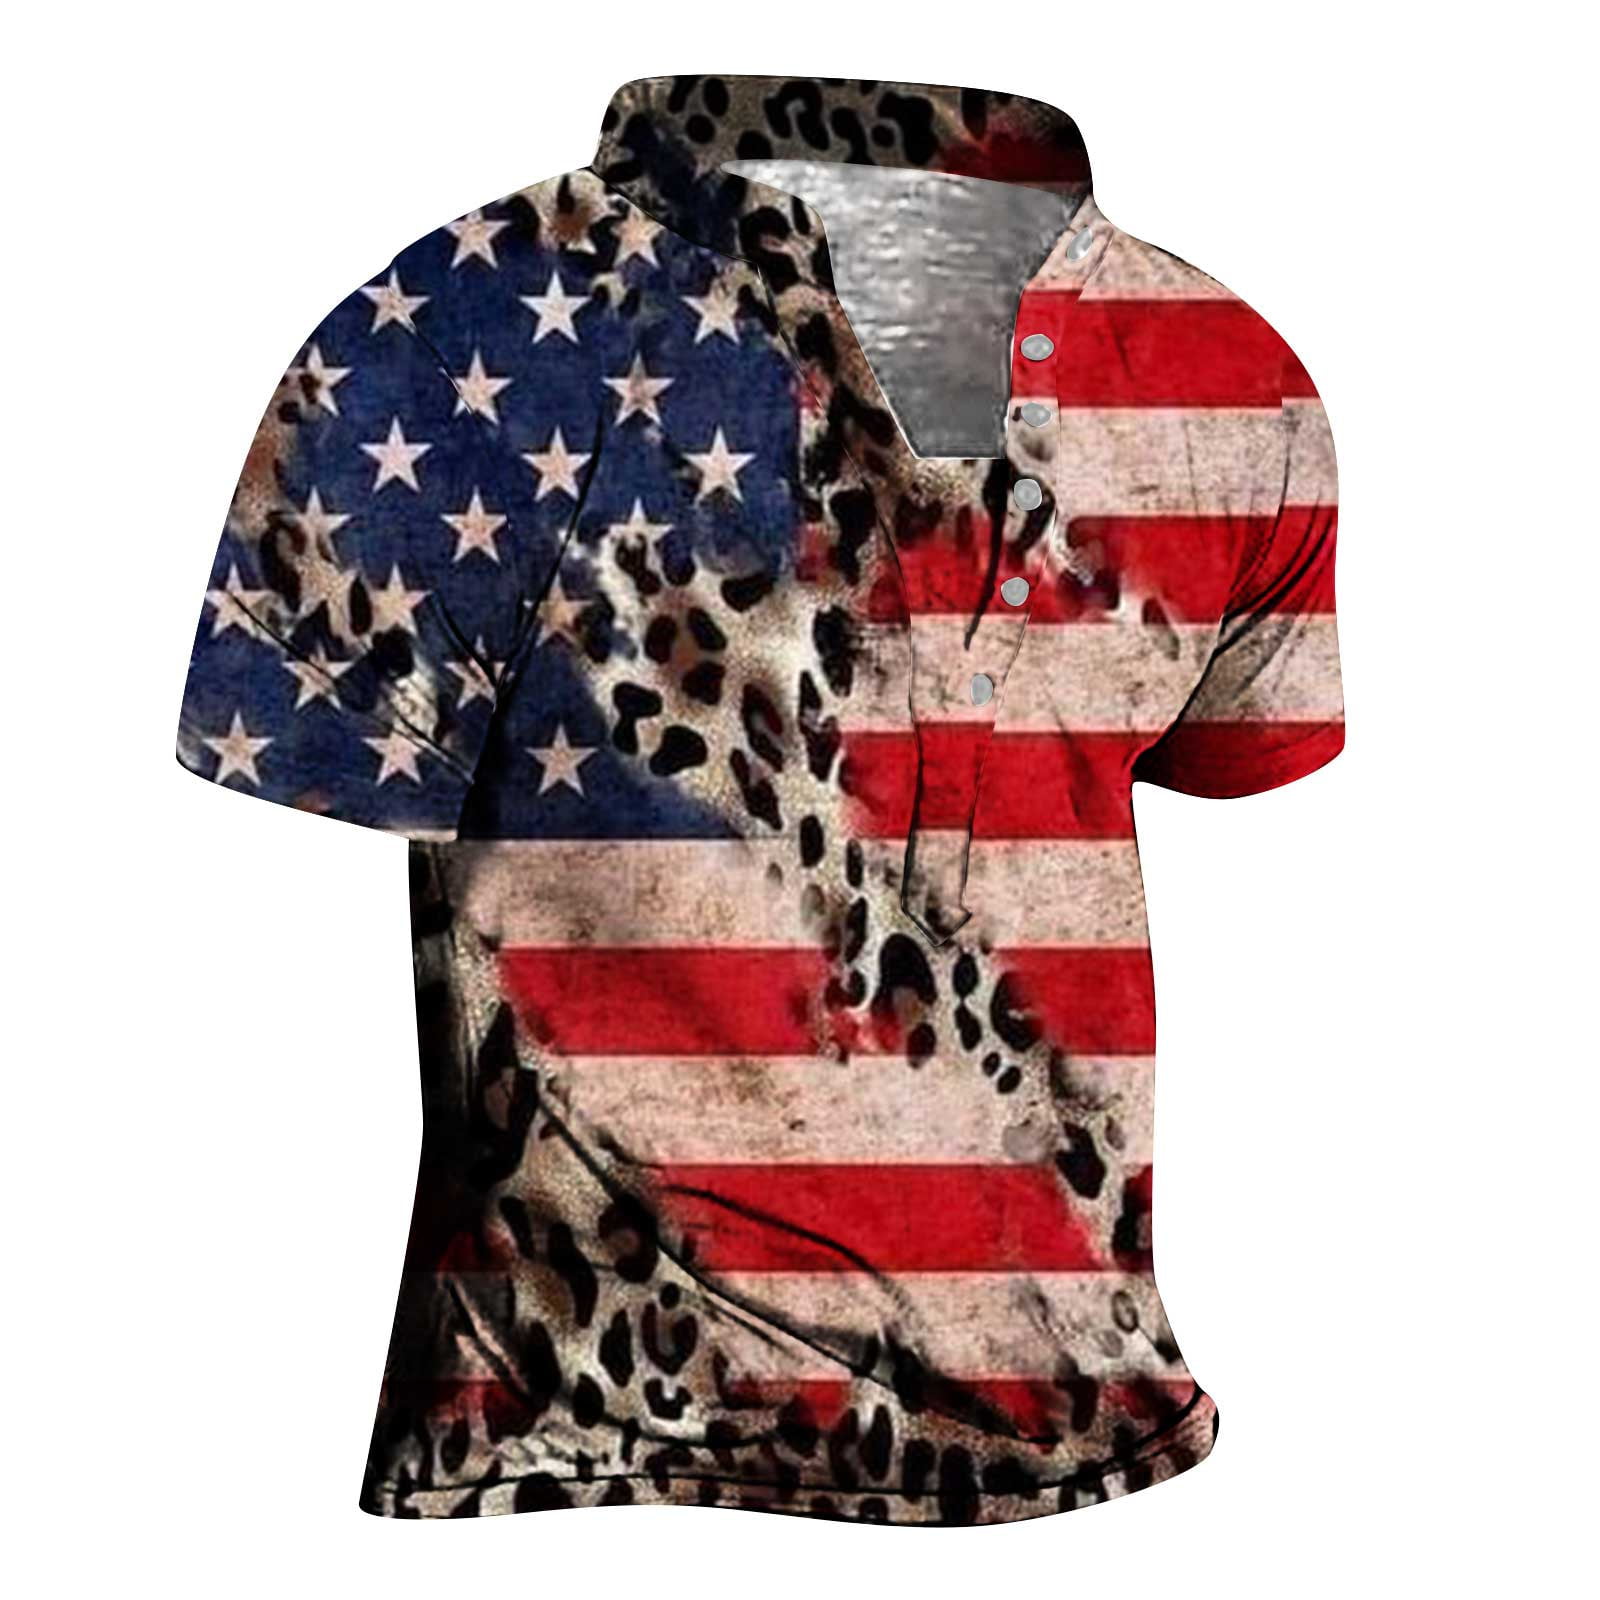  Mens Tops Casual Round Neck Short Sleeve Shirts Independence  Day USA Flag Summer Shirt 4th of July Gym Shirts(03#Red,Medium) : Ropa,  Zapatos y Joyería